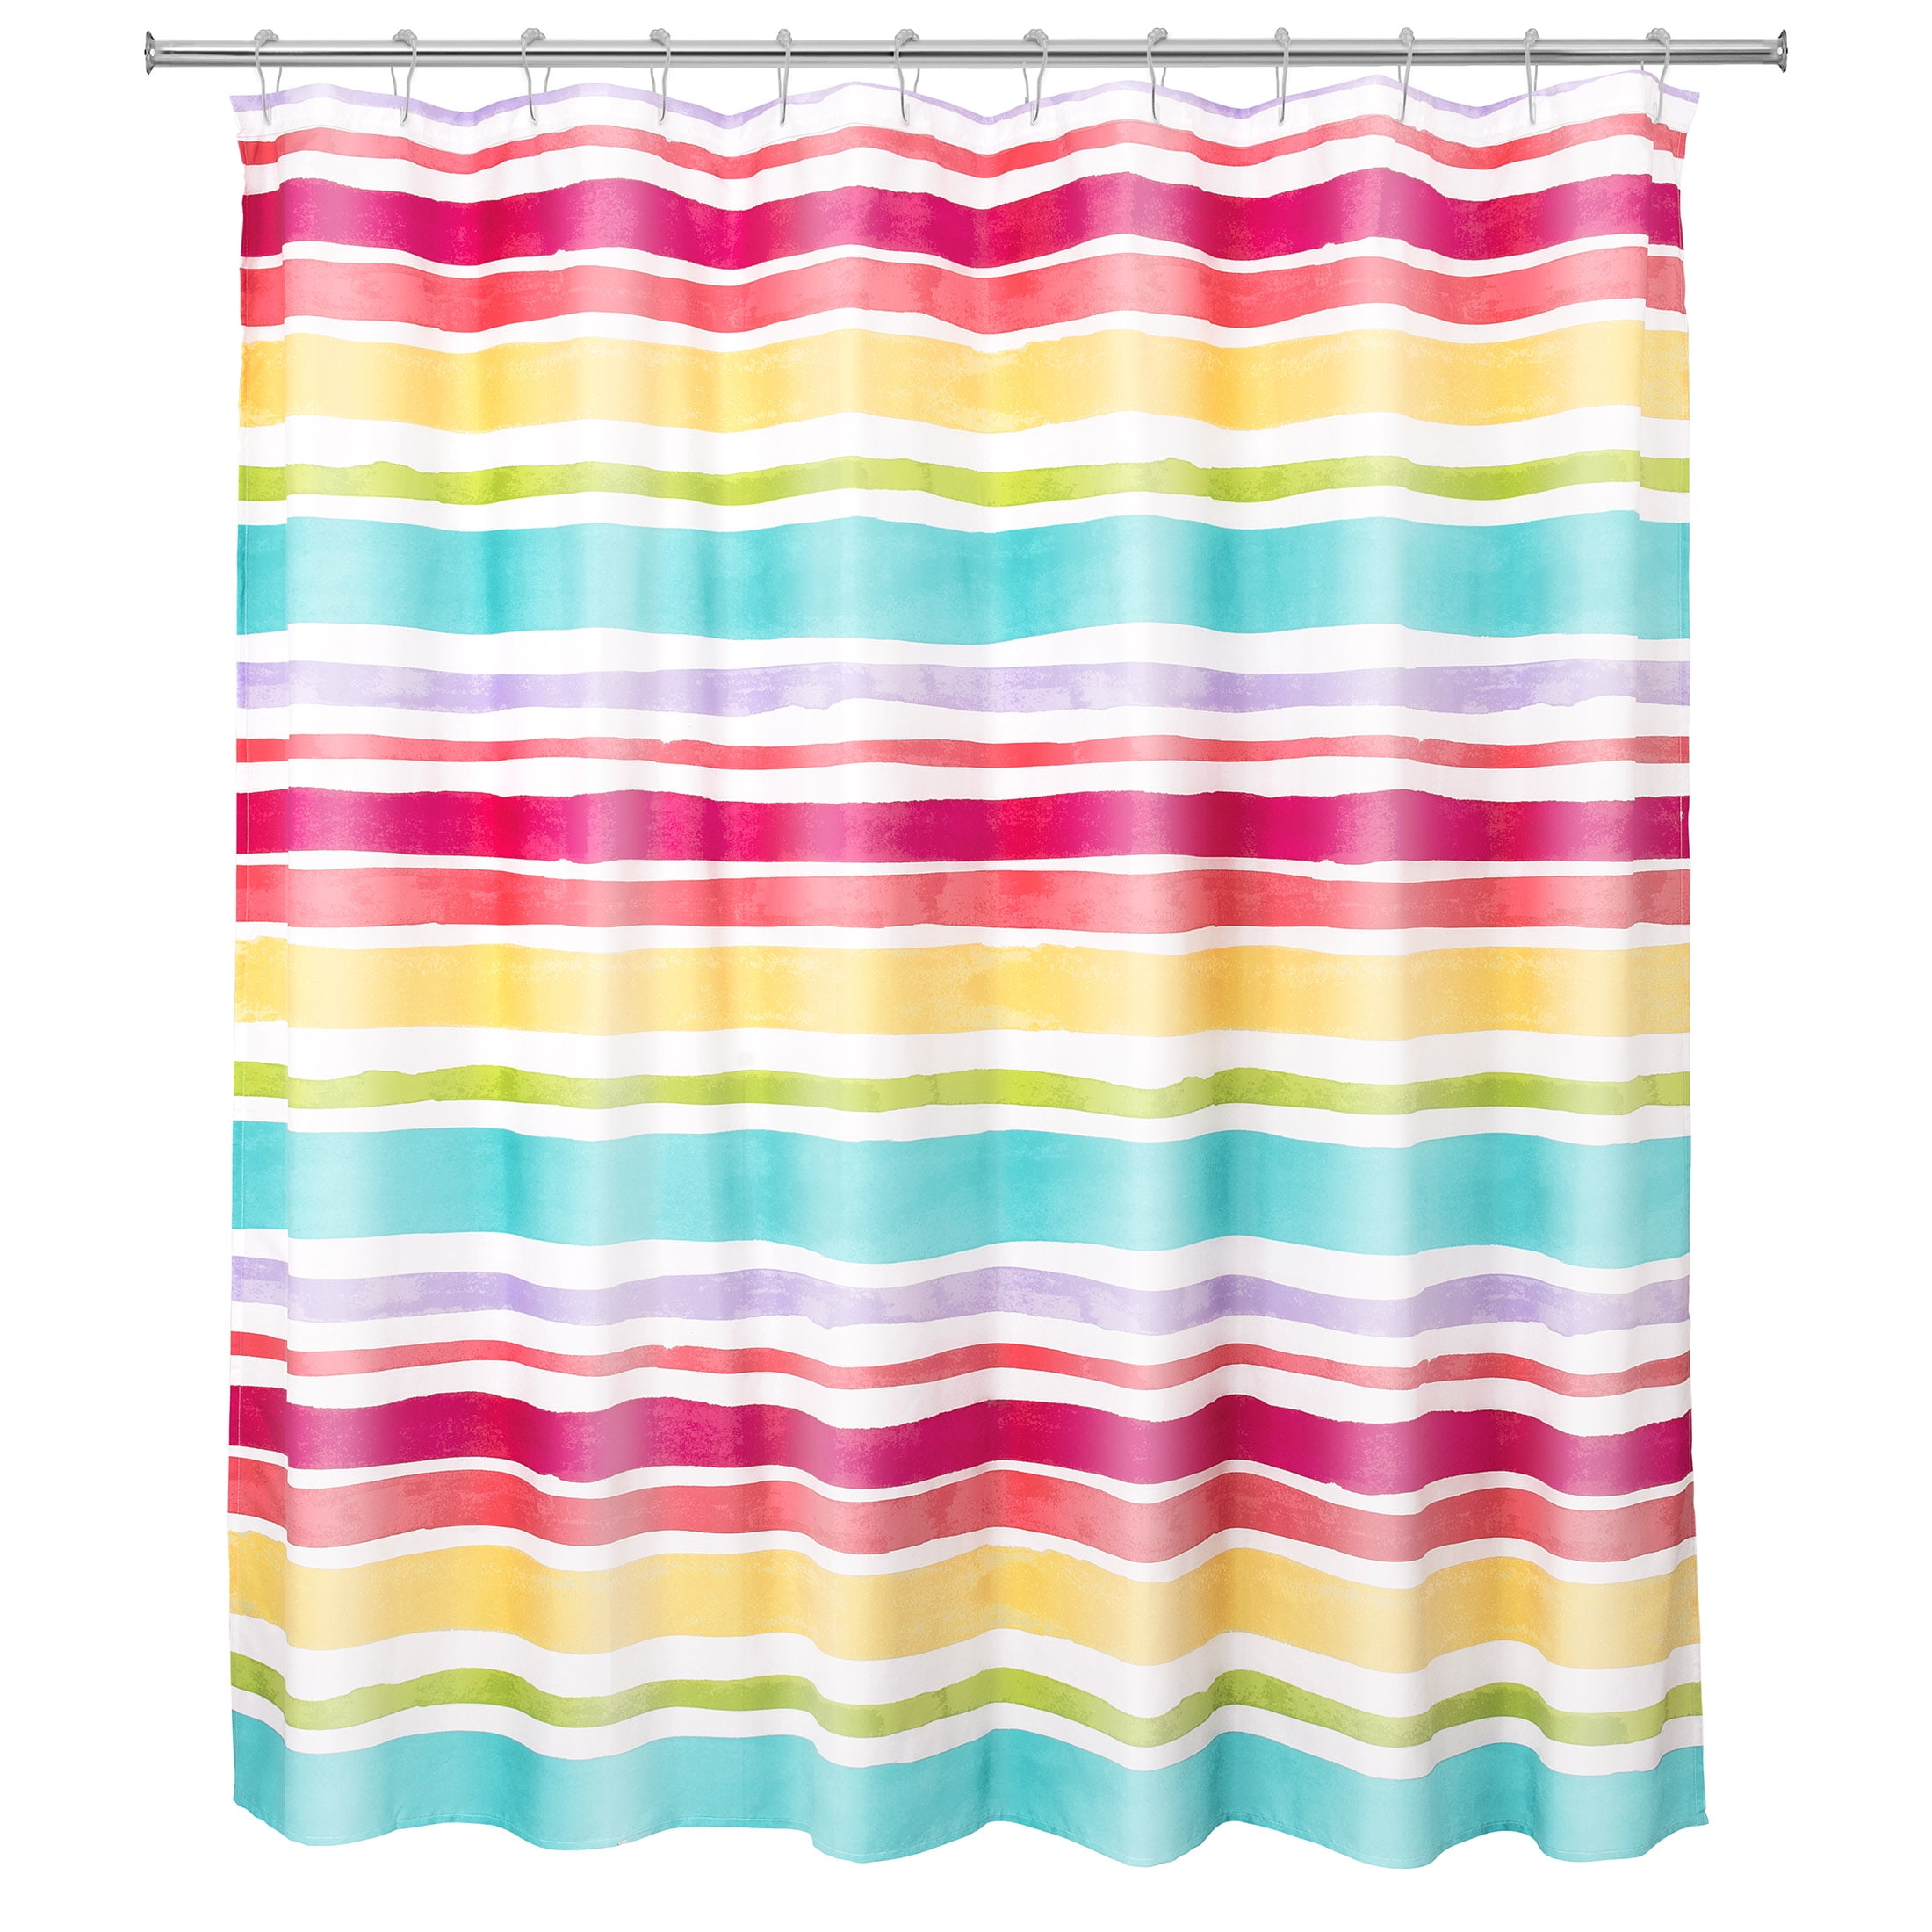 Your Zone Vibrant Rainbow Stripe Novelty Polyester Microfiber Shower Curtain, 72 in x 72 in